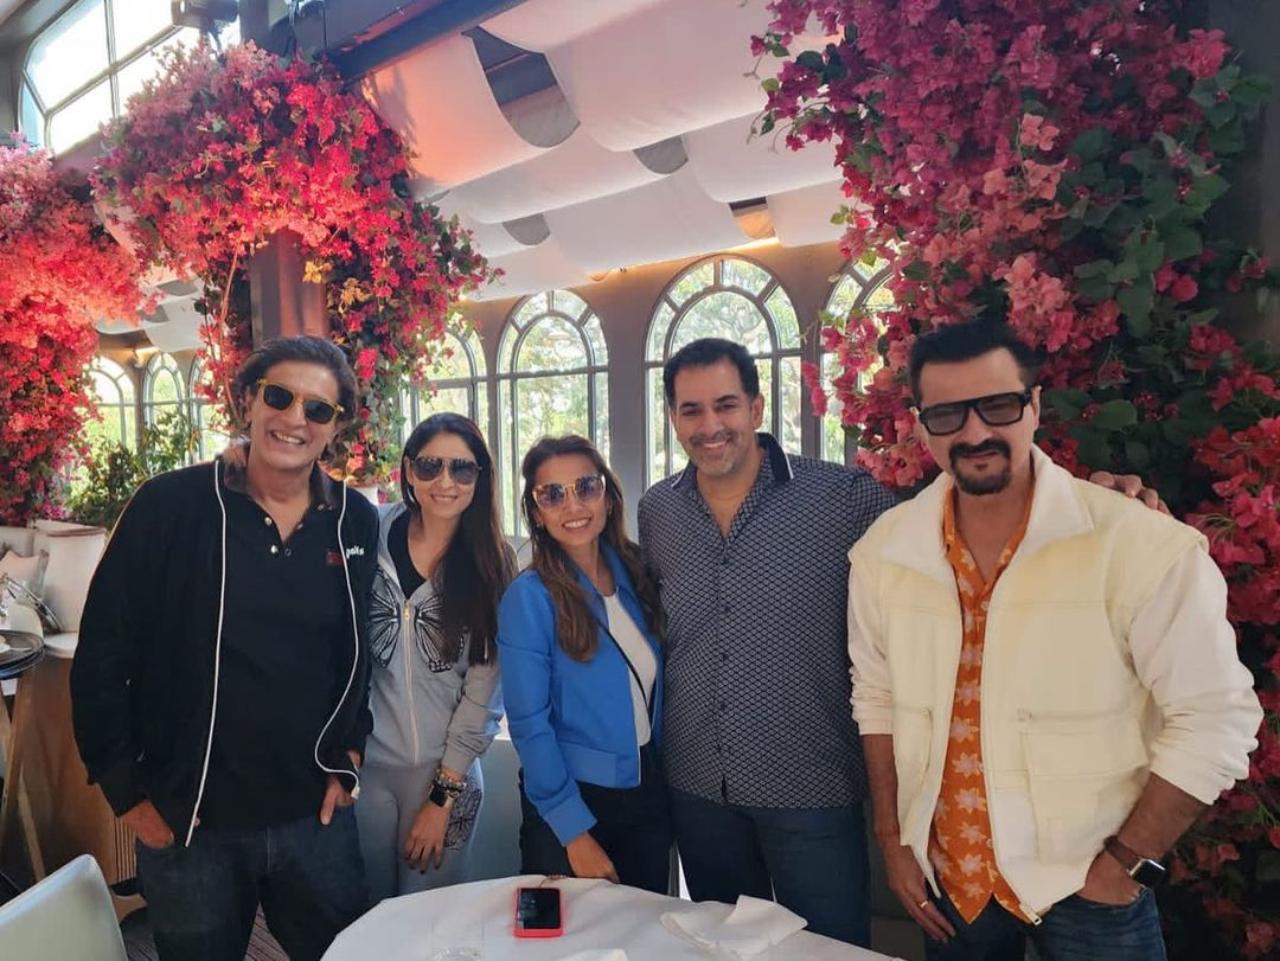 Sanjay Kapoor, who is close friends of Chunky and Bhavana also spent some time with them being touristy in the country